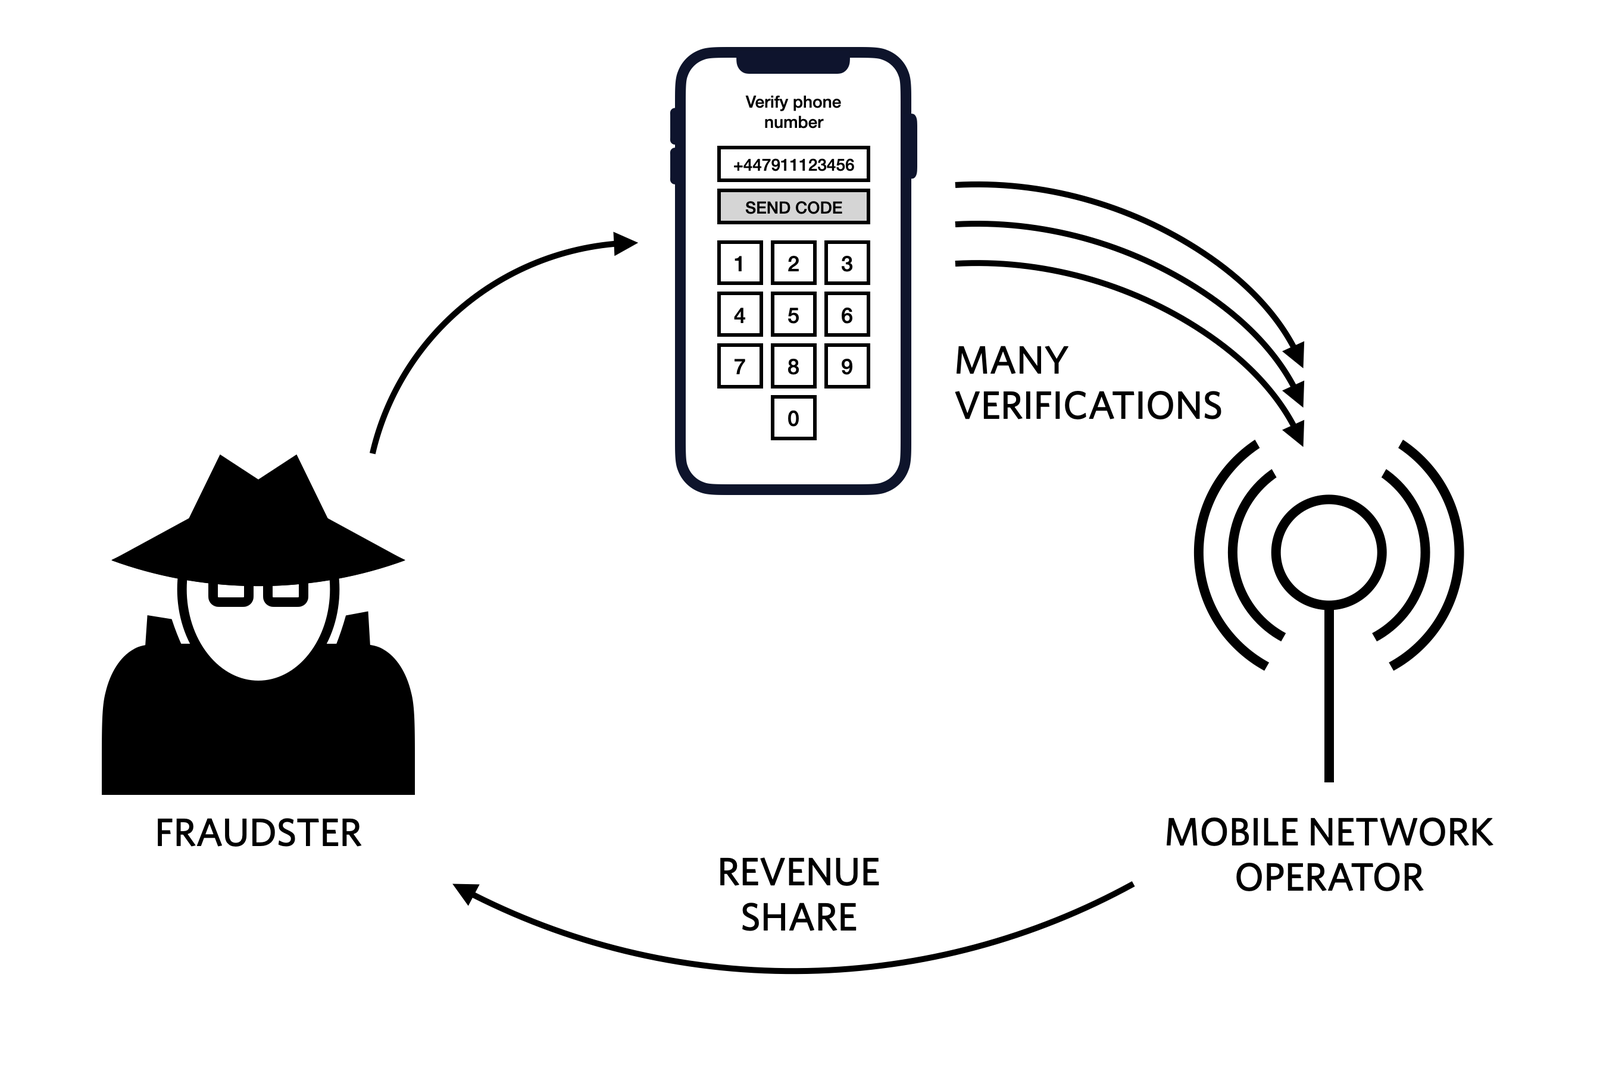 A Twilio diagram describing the fraud ring involved in SMS toll fraud (aka “sms pumping”).